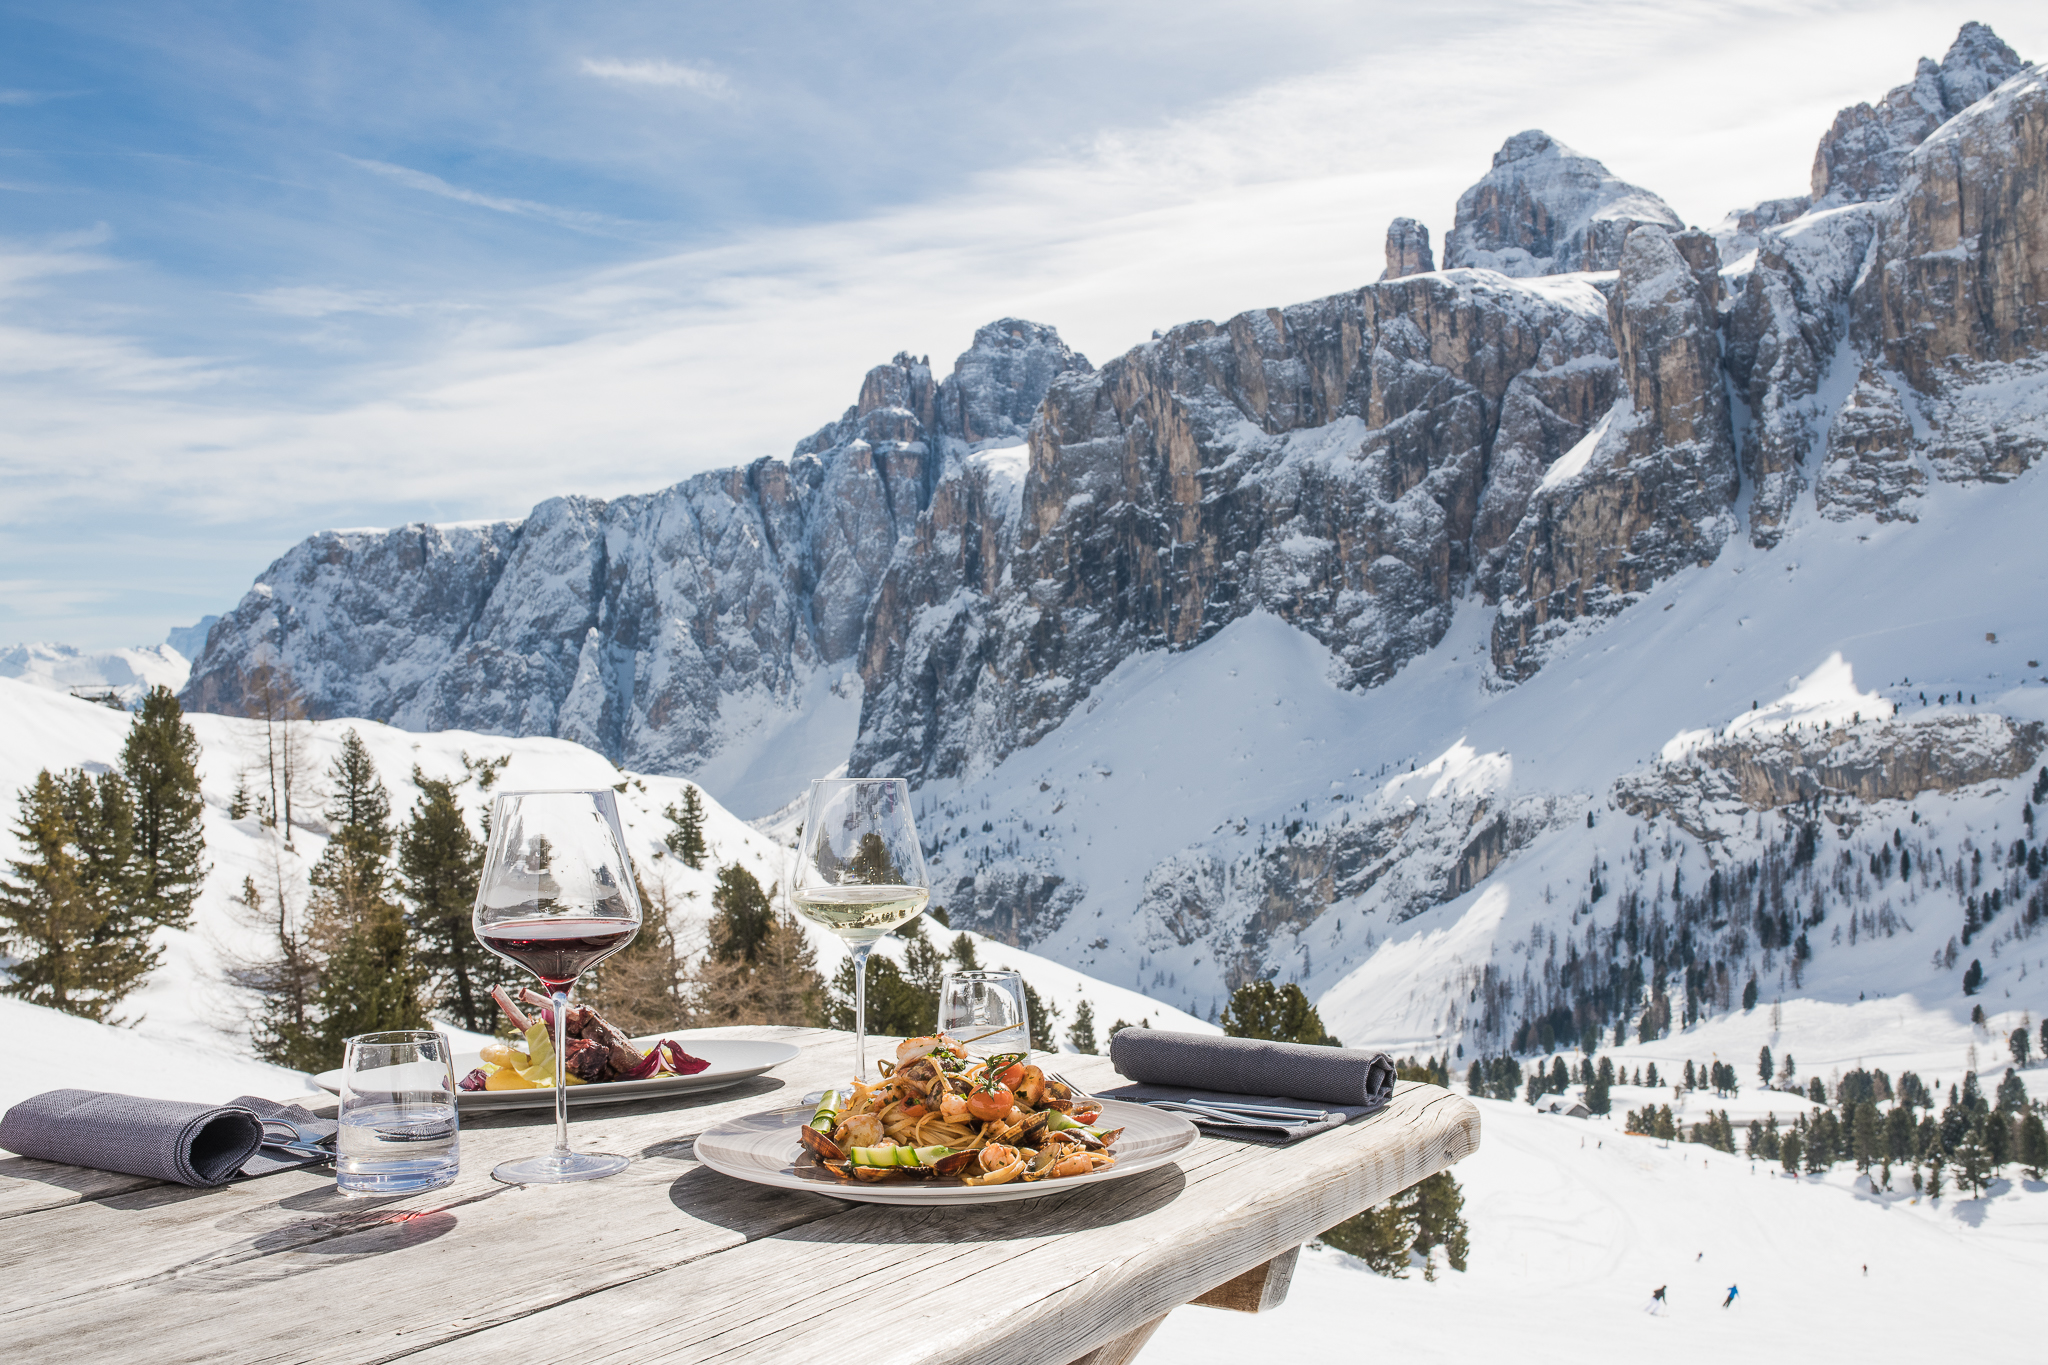 gourmet meal in the dolomites